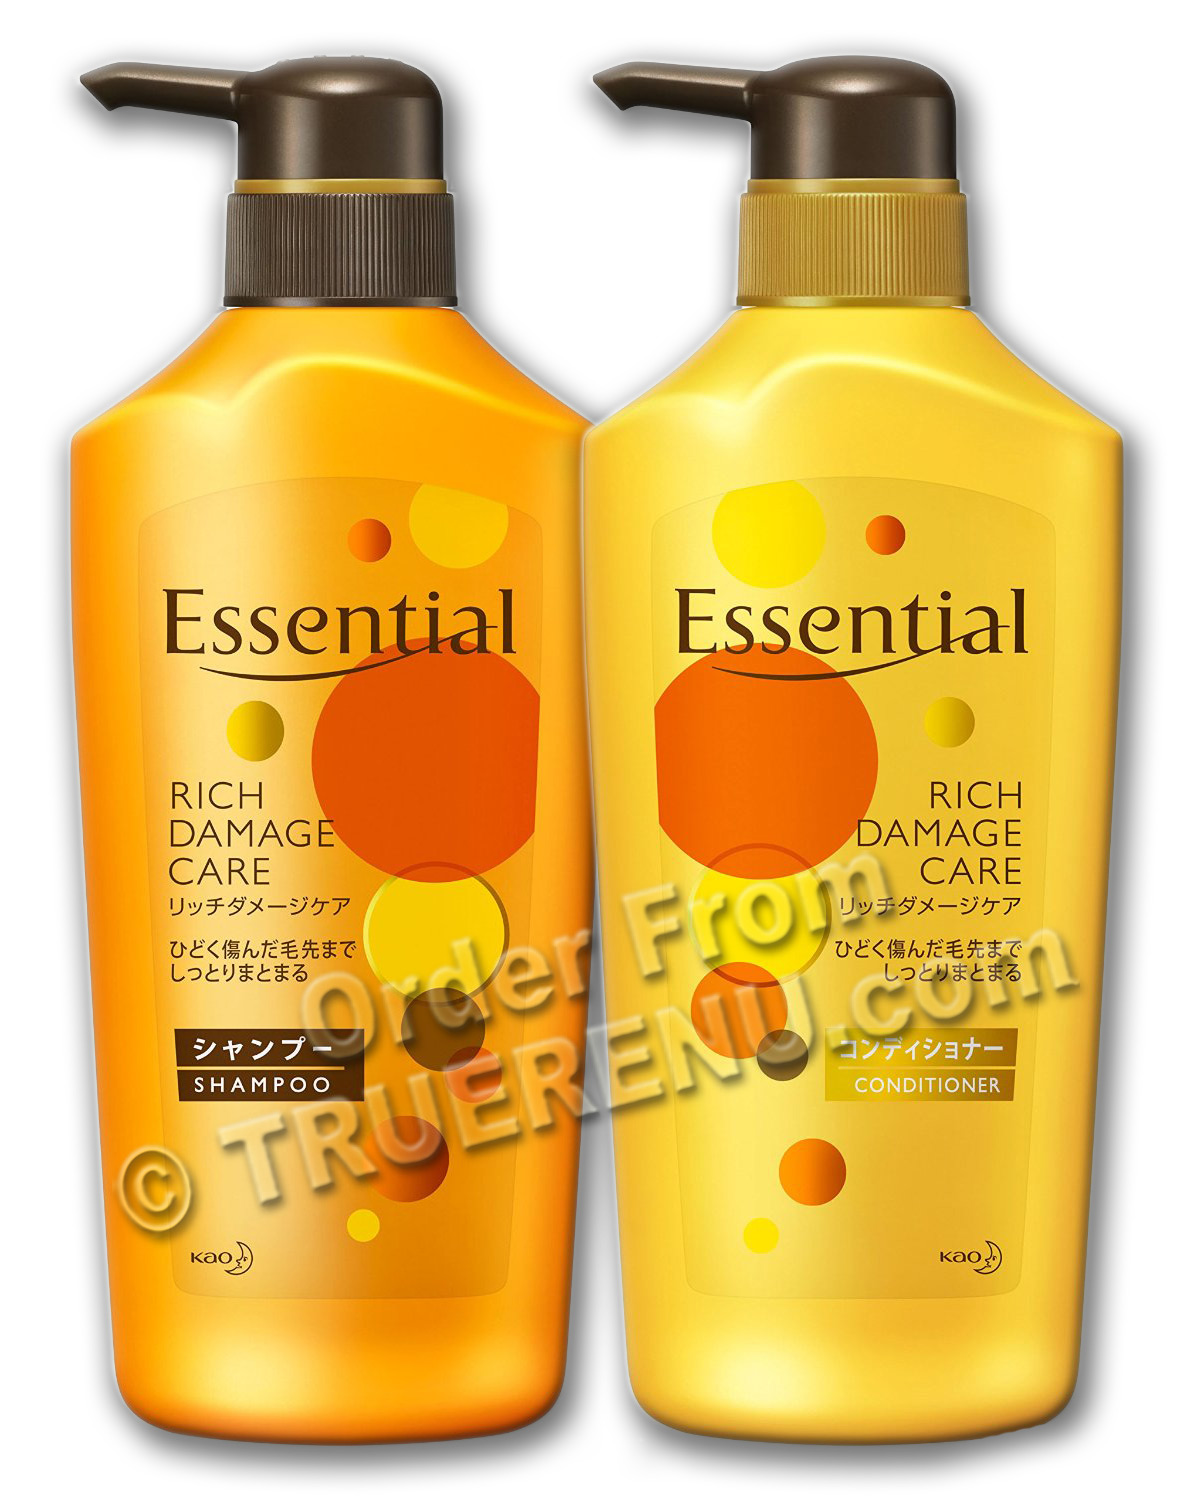 PHOTO TO COME: KAO Essential - Rich Damage Hair Care Set: Shampoo and Conditioner - Two 480ml pump bottles